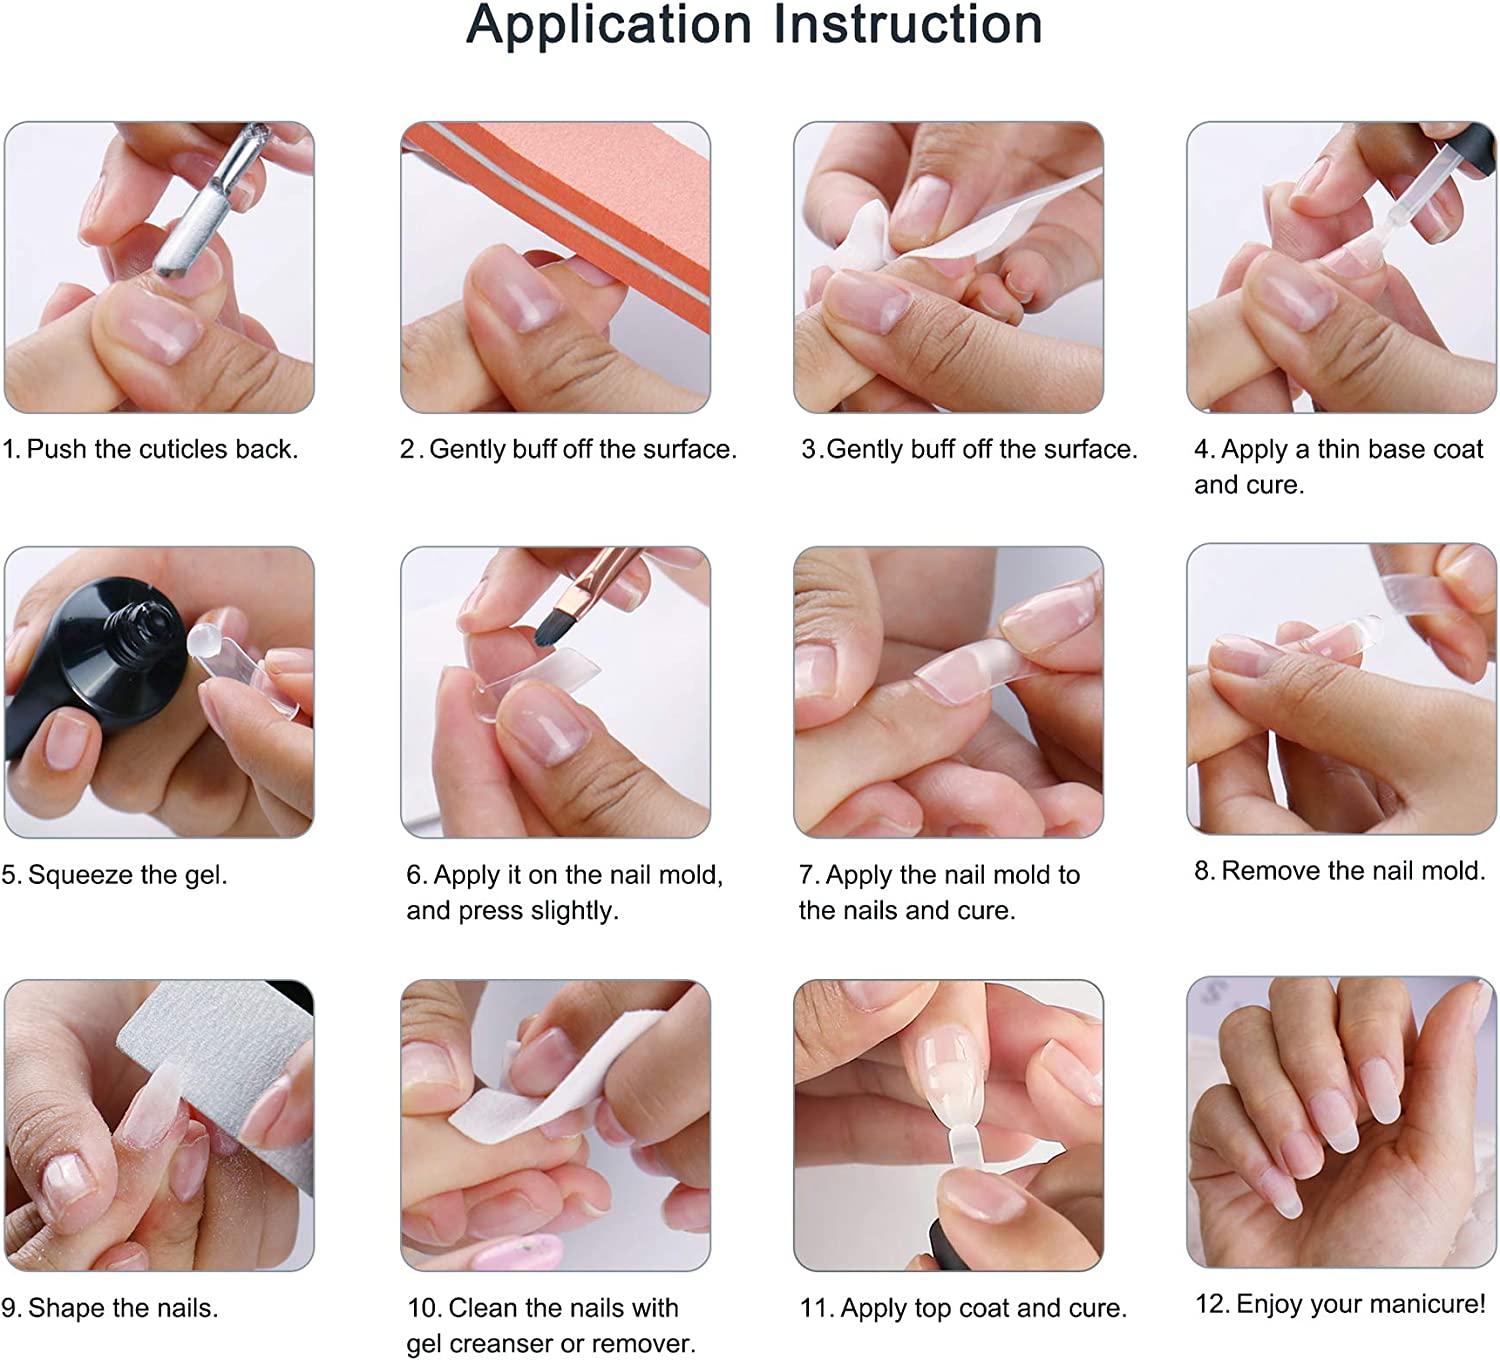 asp nail builder curing gel instructions 